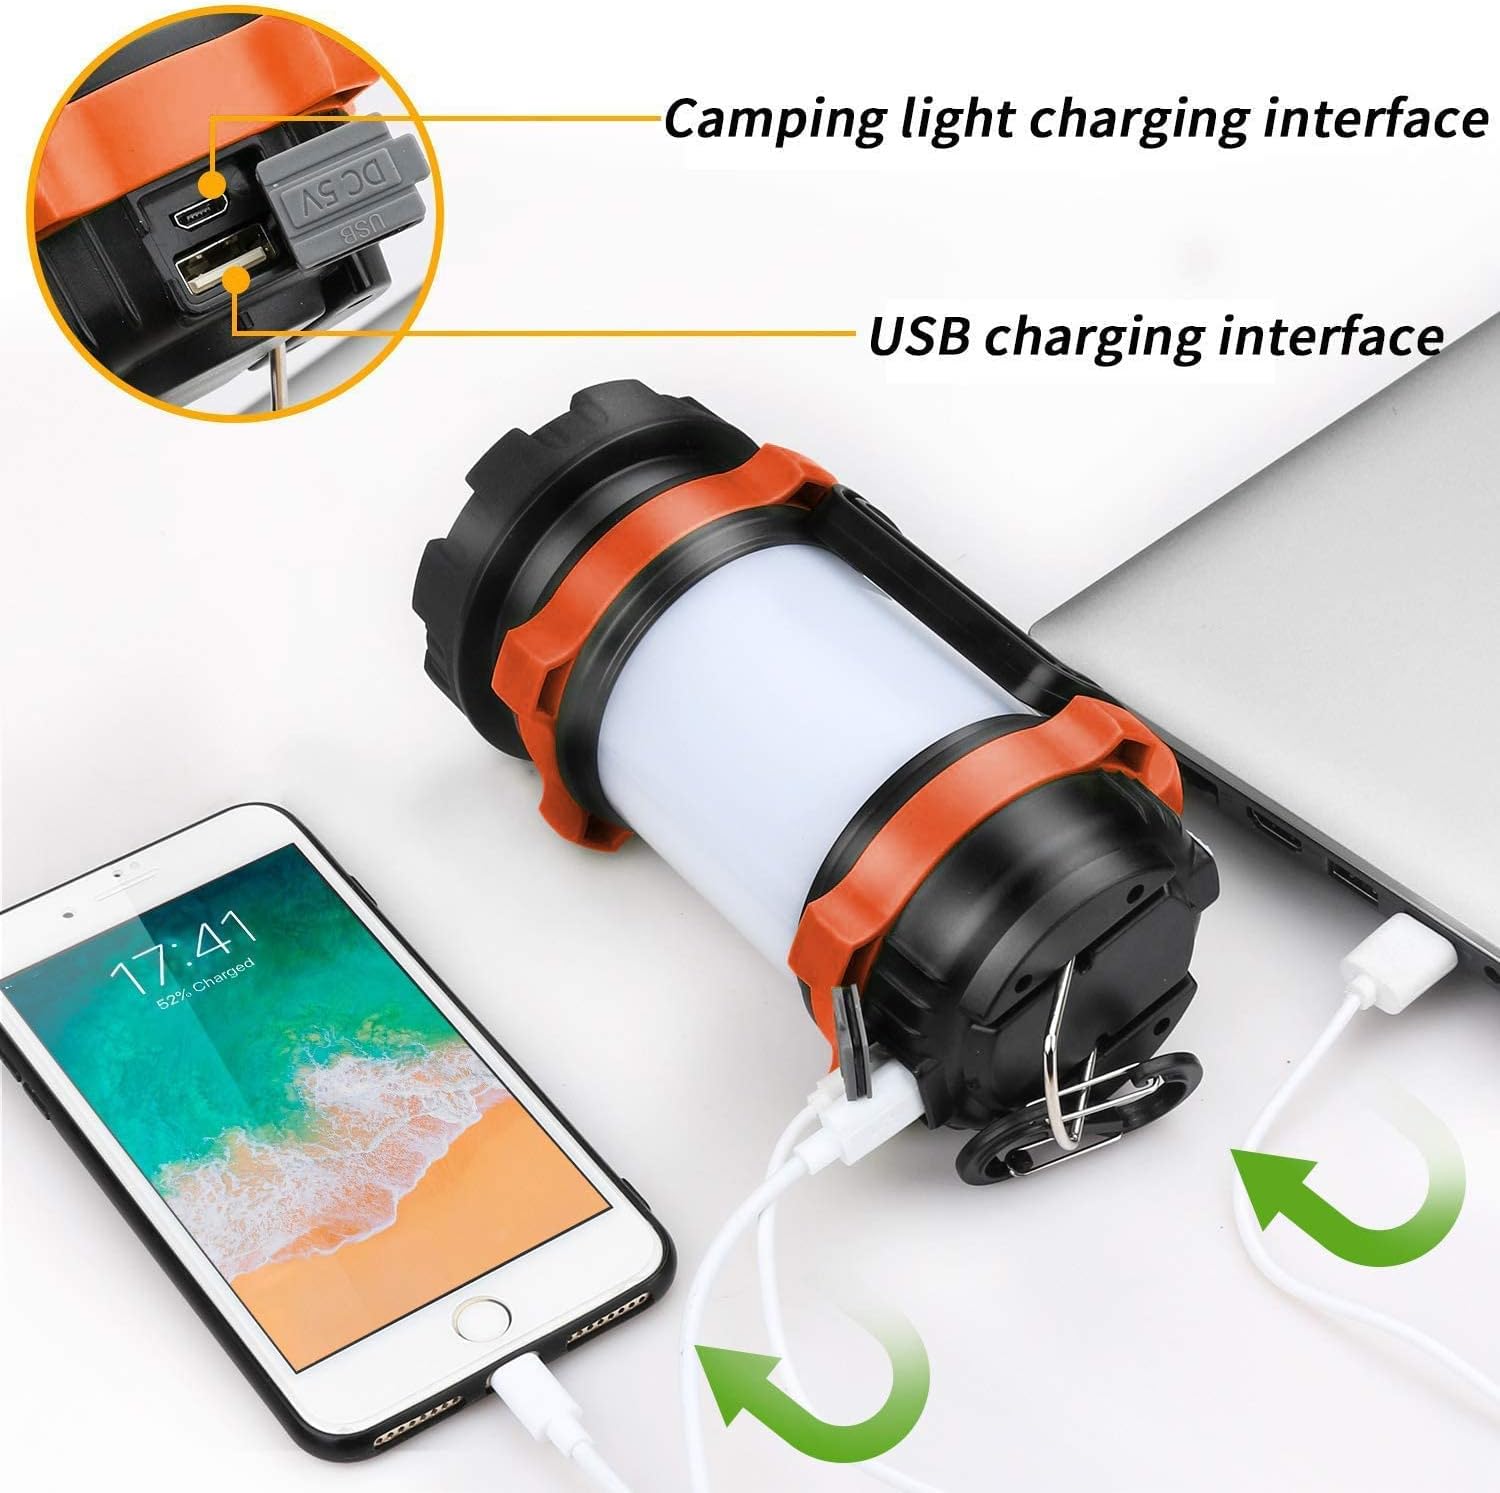 IODOO 10000mAh 4000Lm Flashlight Portable LED Camping Lantern Rechargeable Light 30W with Magnet, Power Bank , Ipx4 Waterproof Tent Light Power